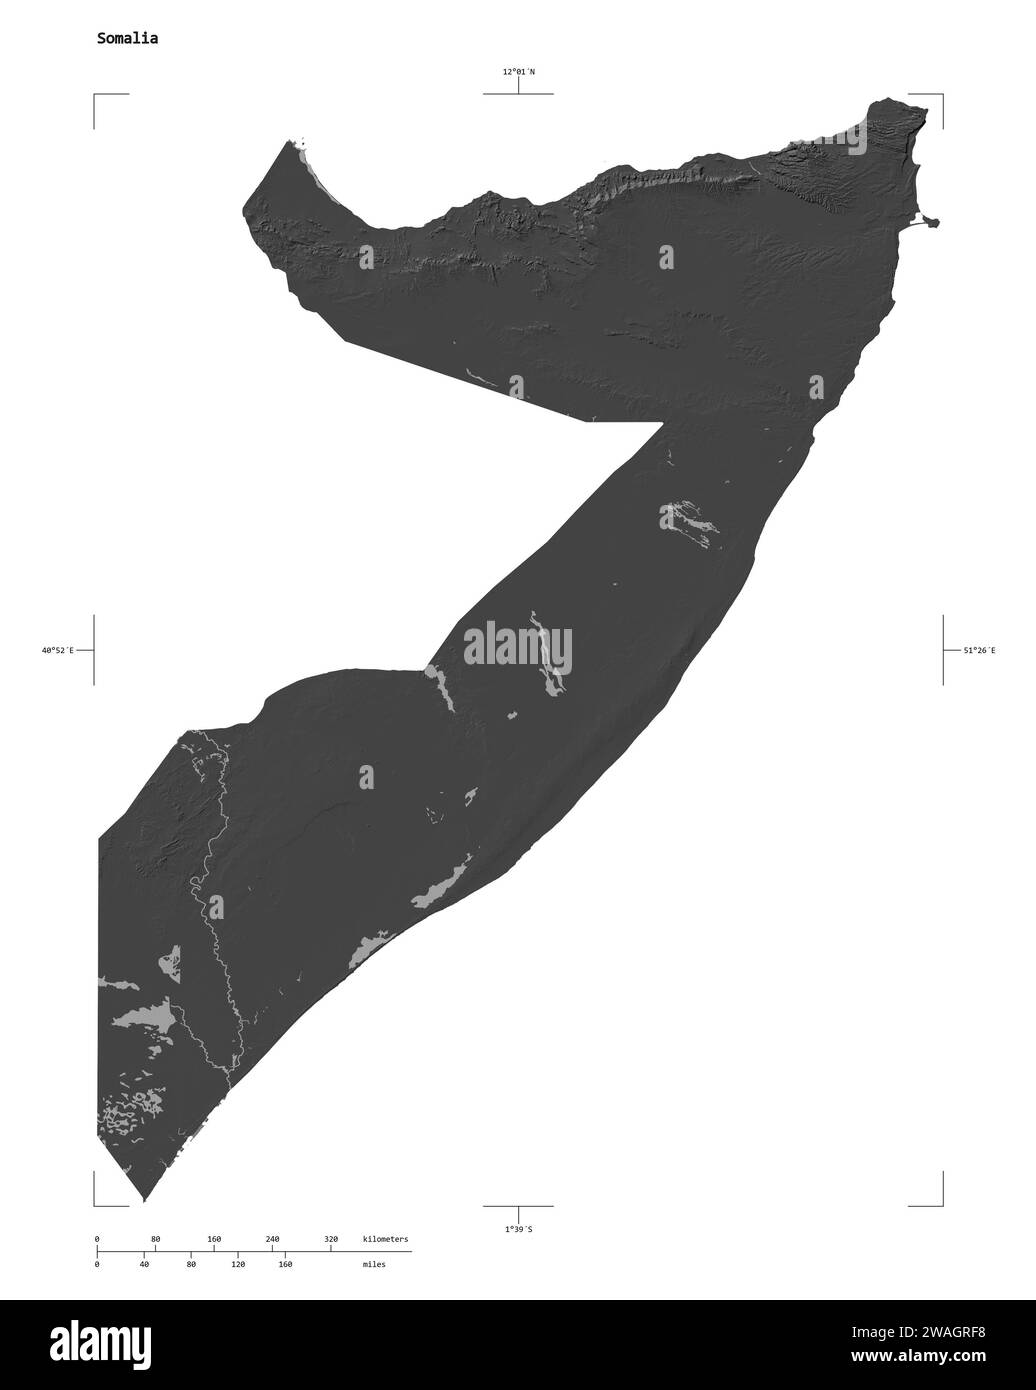 Shape of a Bilevel elevation map with lakes and rivers of the Somalia, with distance scale and map border coordinates, isolated on white Stock Photo